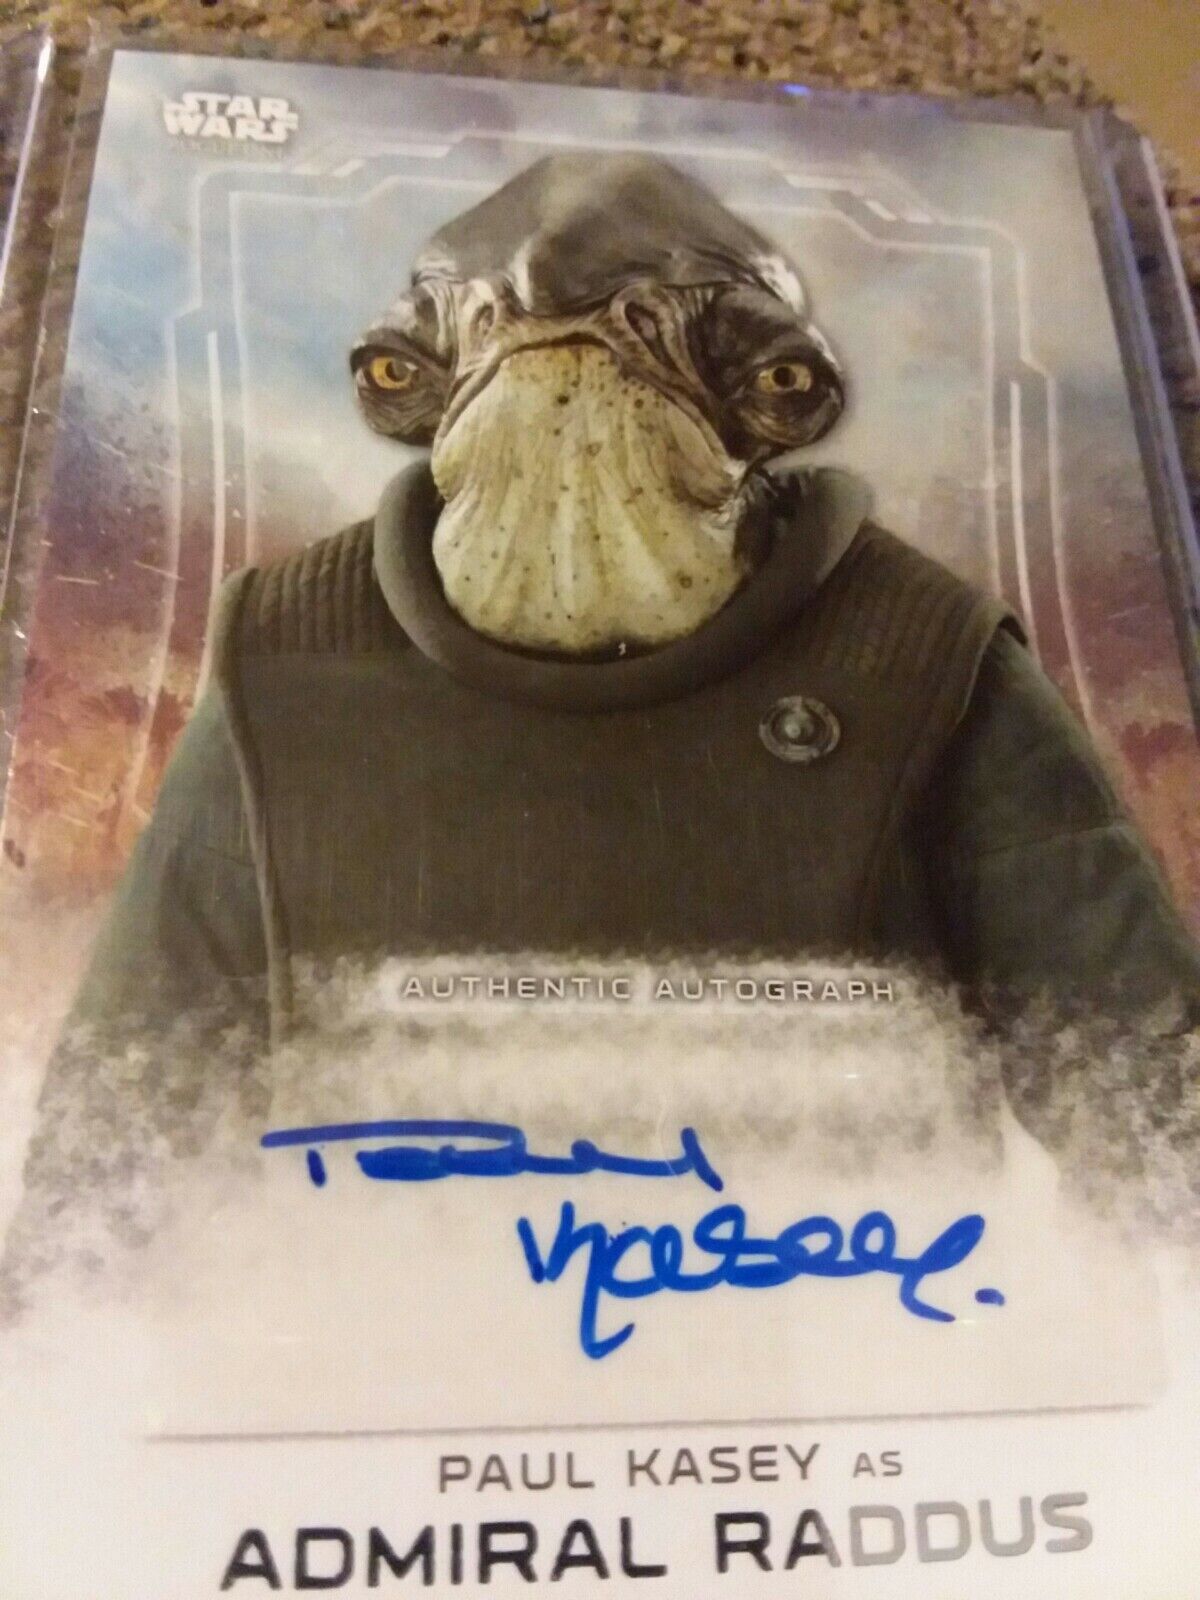 Star Wars Rogue One Series 1 Autograph Card Paul Kasey as Admiral Raddus